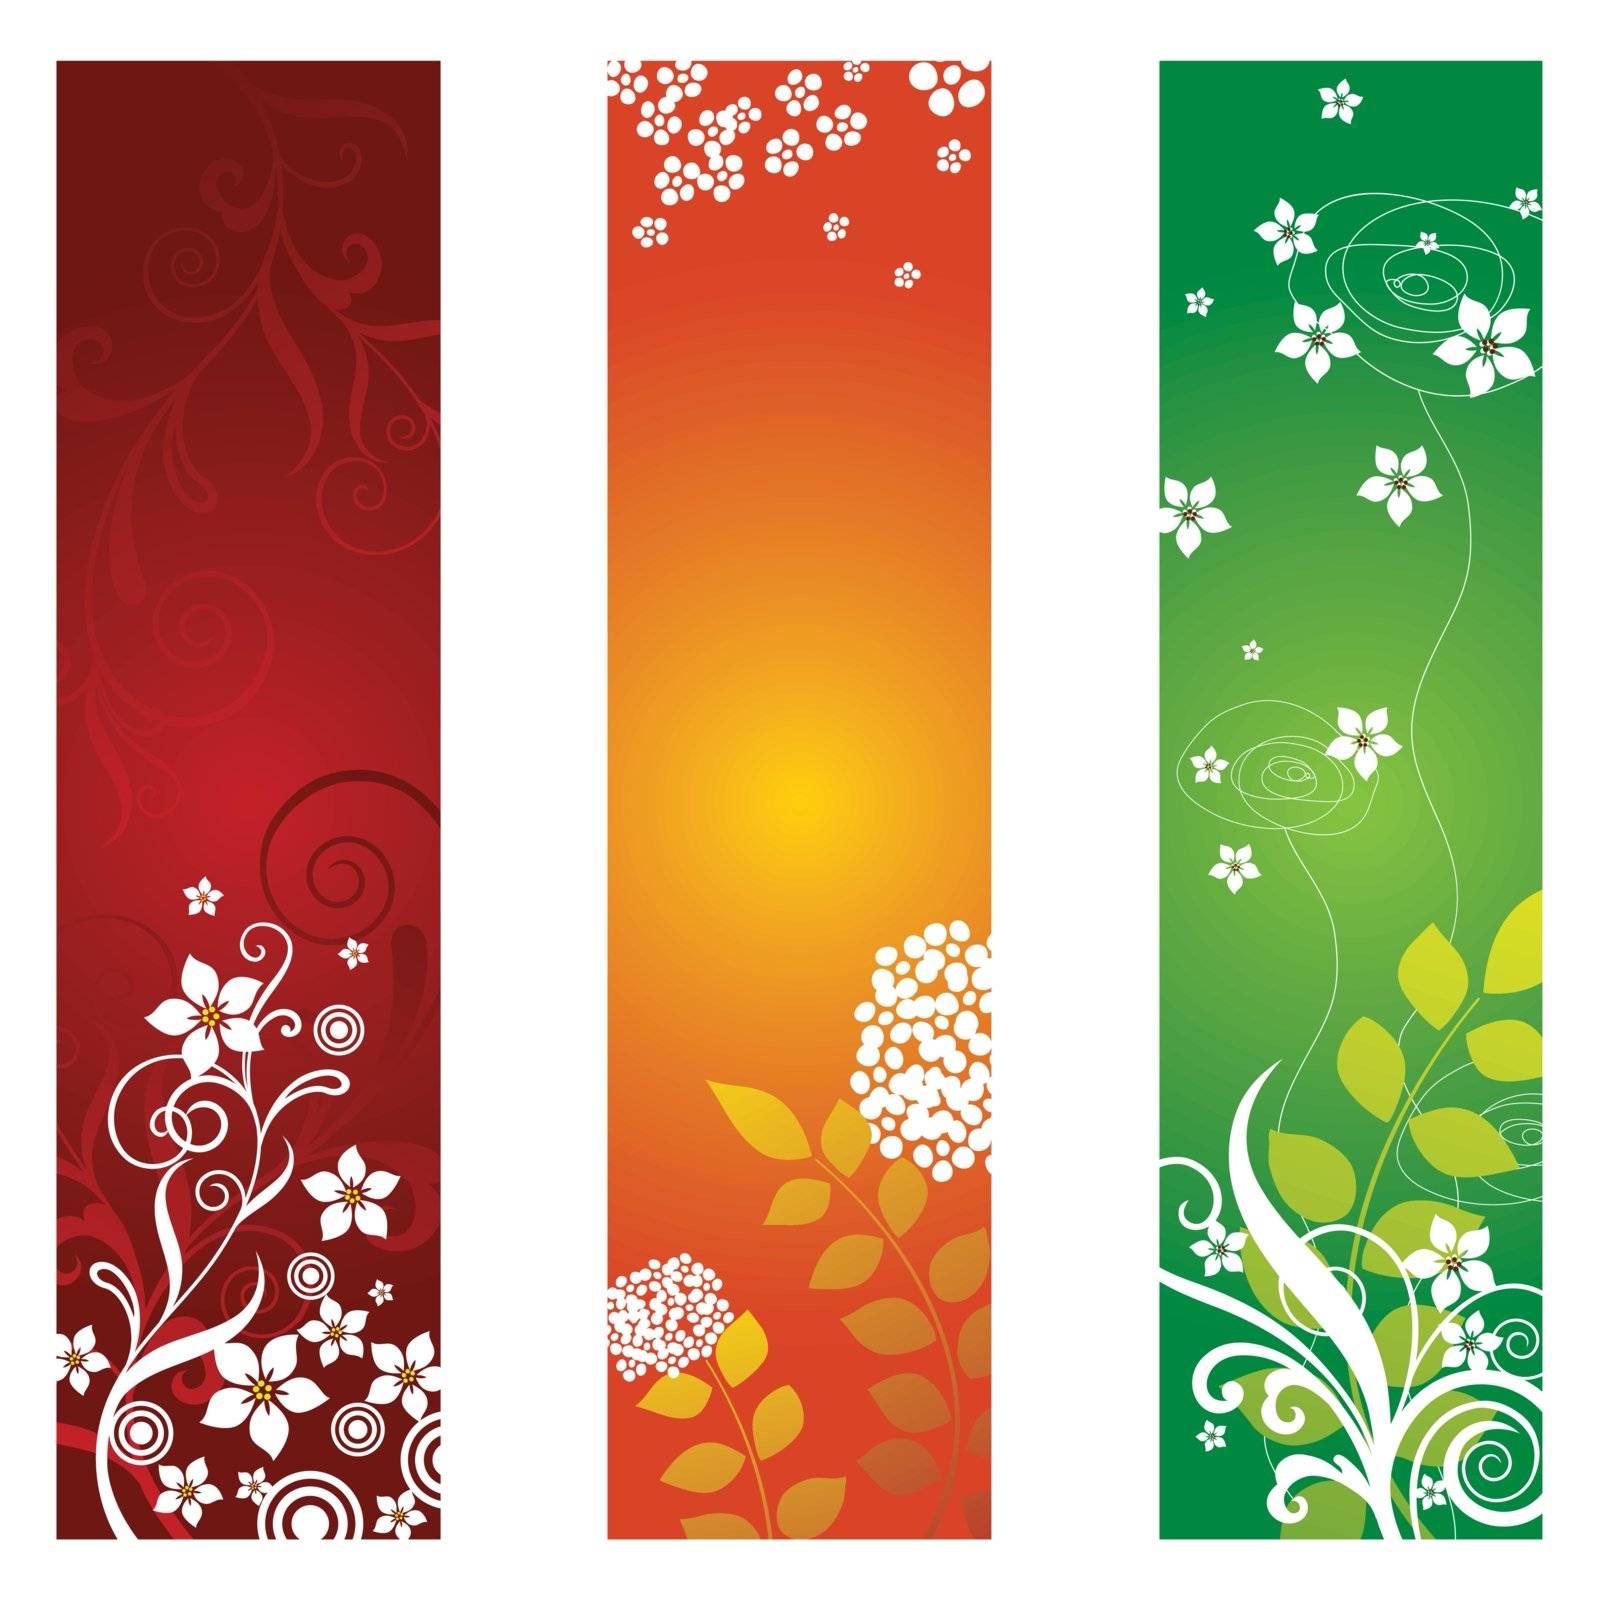 Three seasonal floral banners by misslina